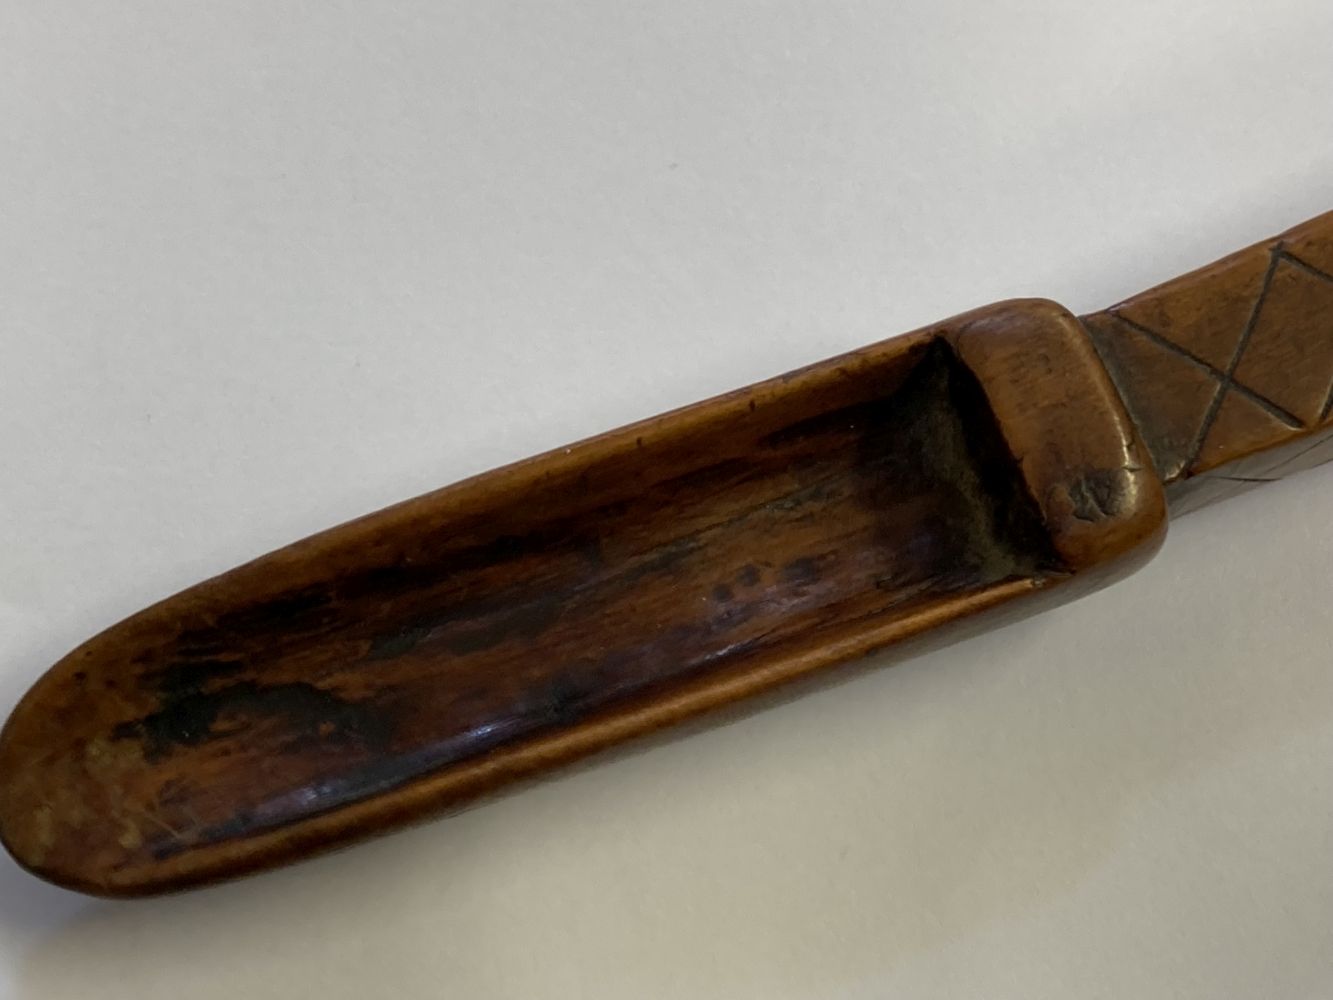 Treen. A 17th century treen apple corer dated 1696 - Image 4 of 10